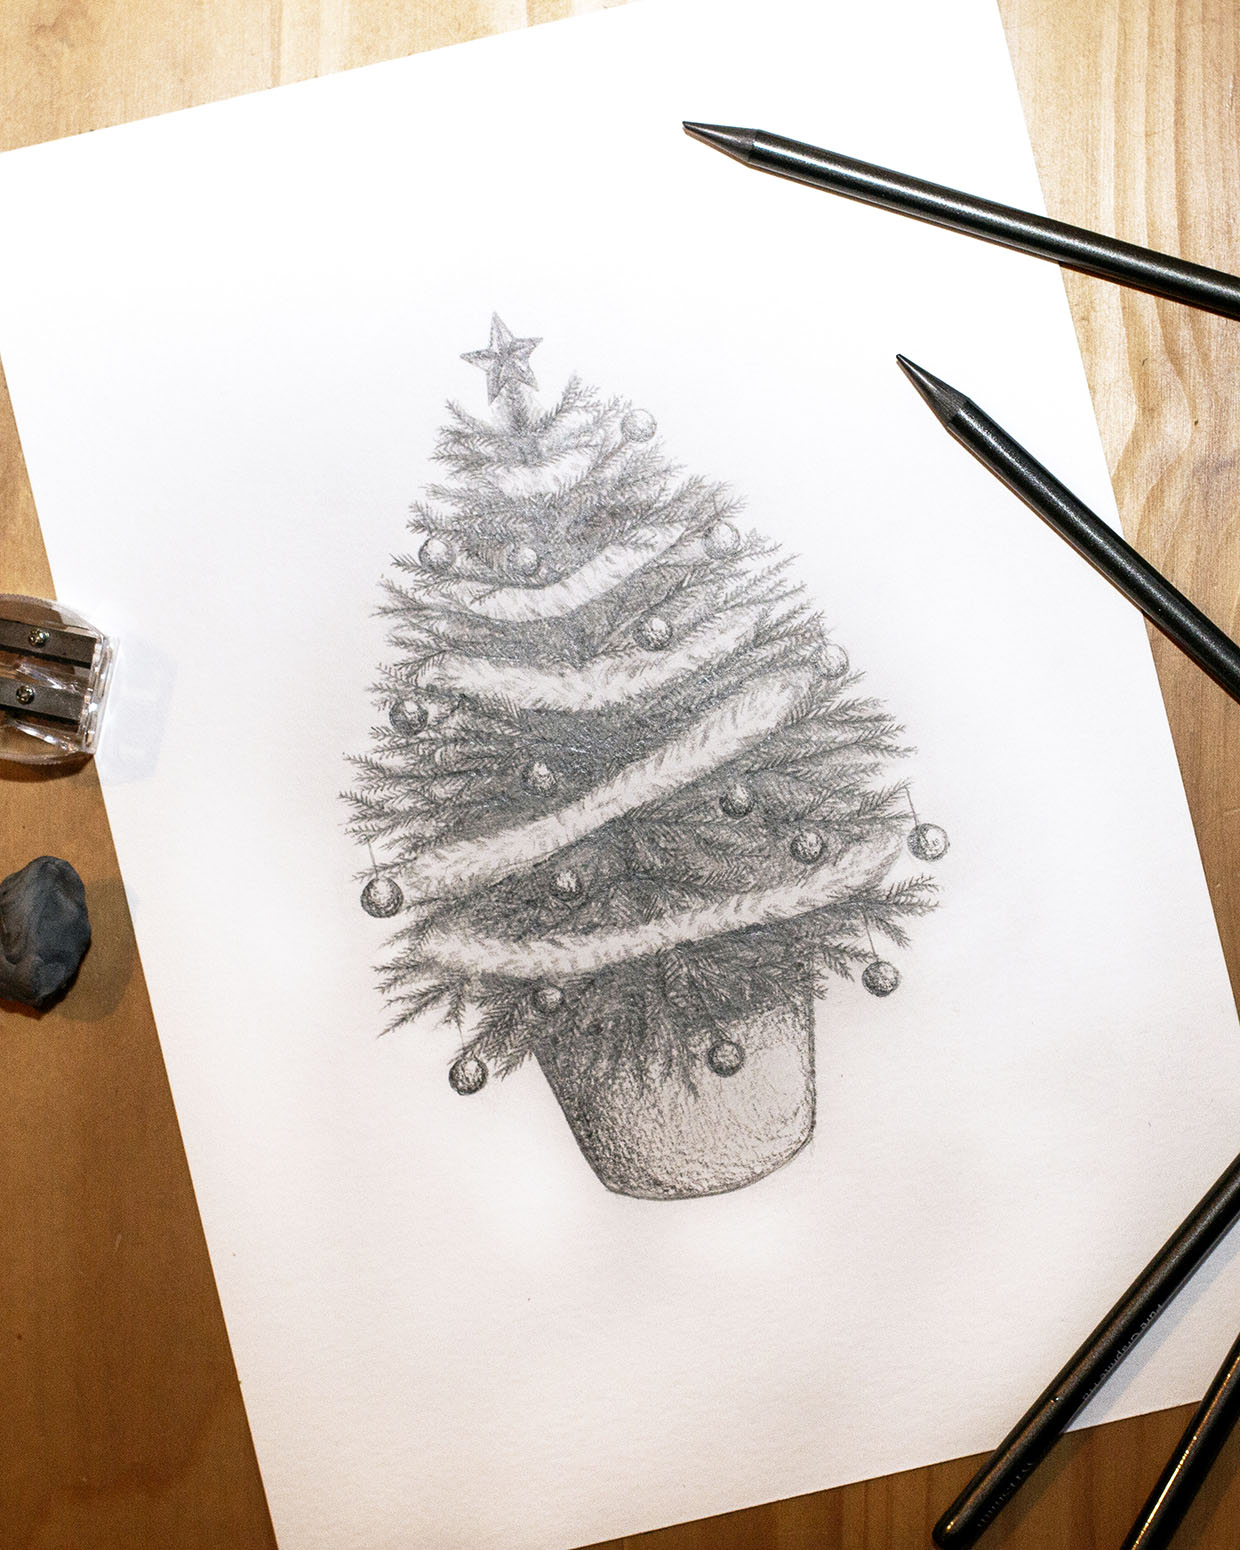 How to draw a Christmas tree